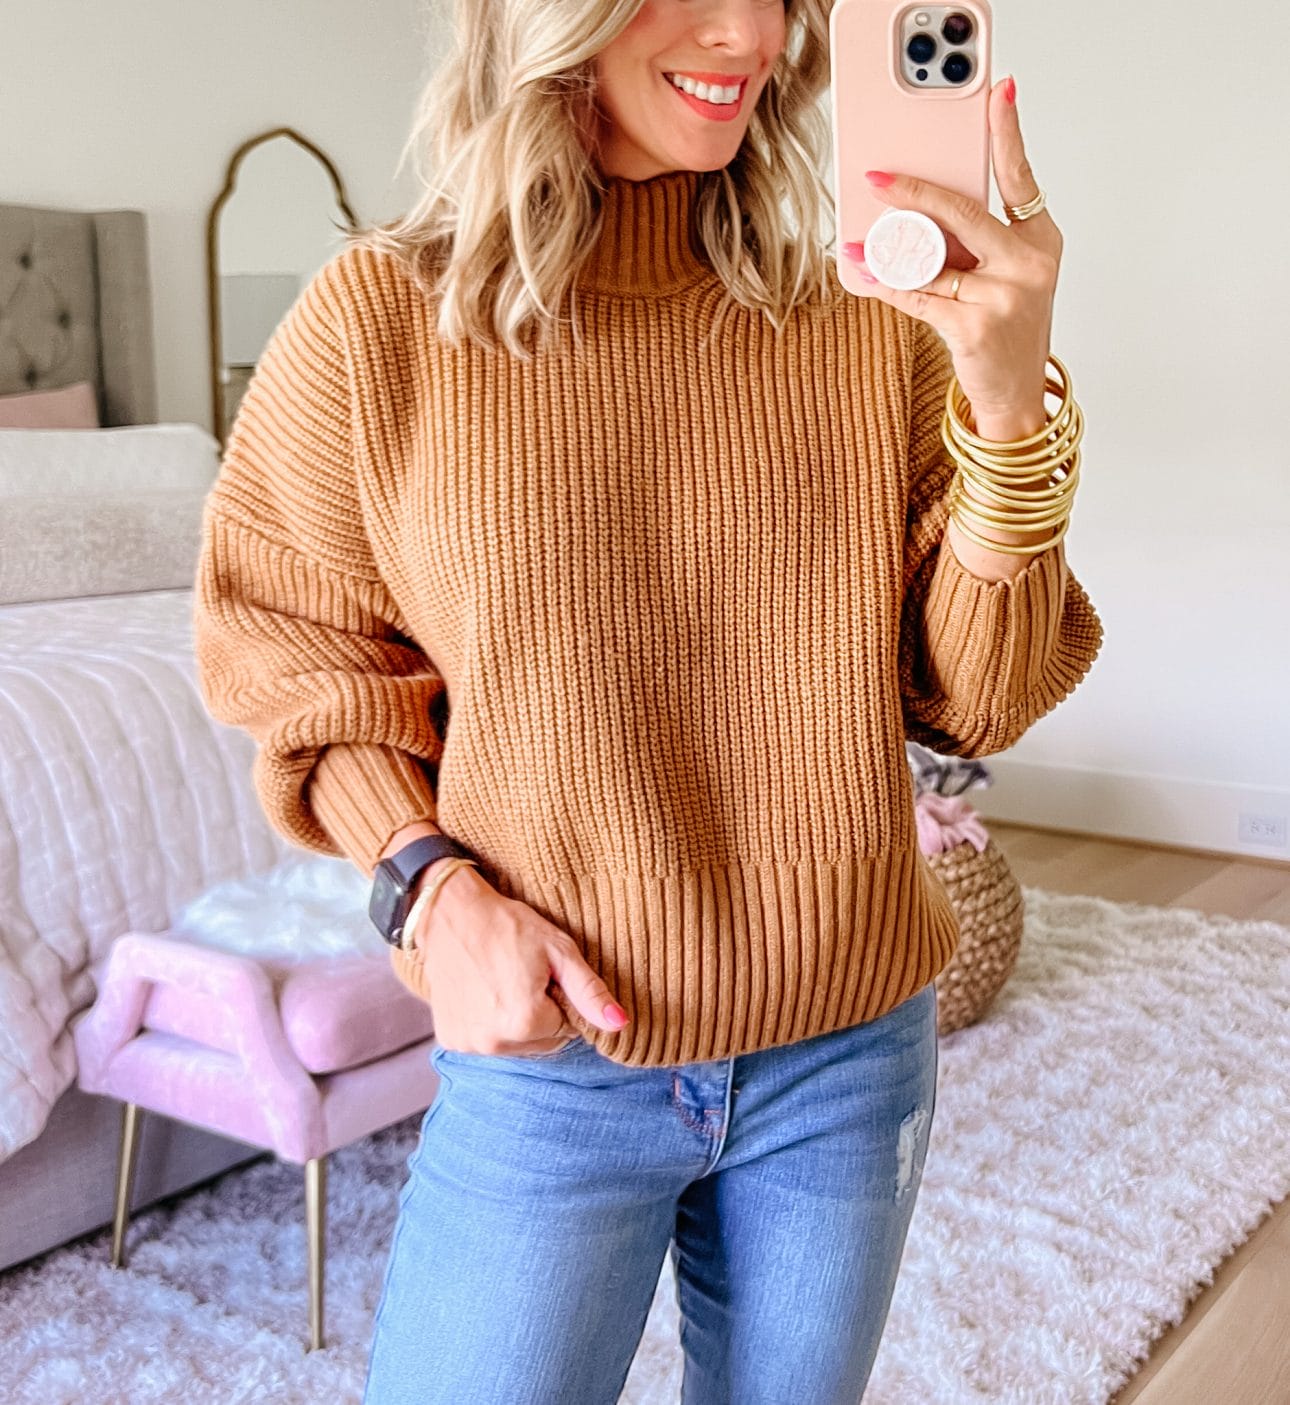 Camel colored Sweater, Jeans, Wedges 